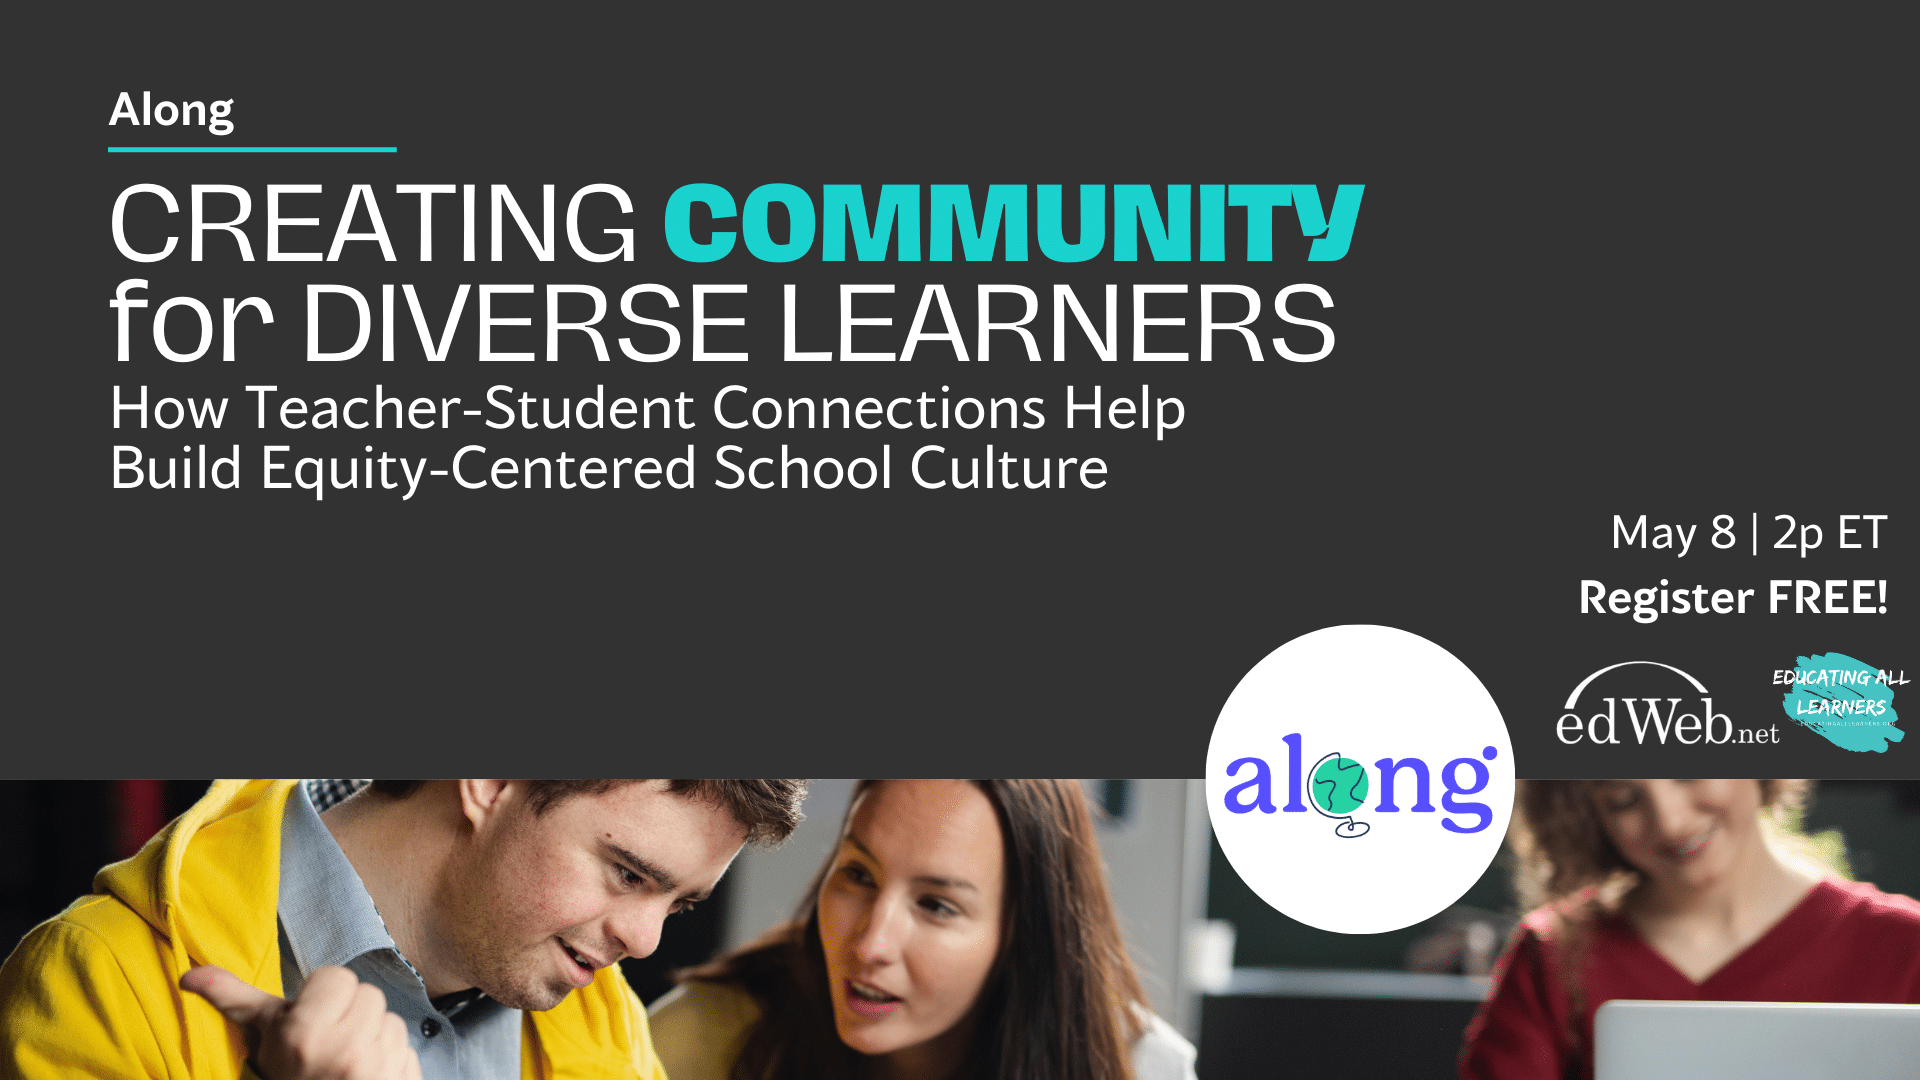 Webinar: Creating Community for Diverse Learners: How Teacher-Student Connections Help Build Equity-Centered School Culture